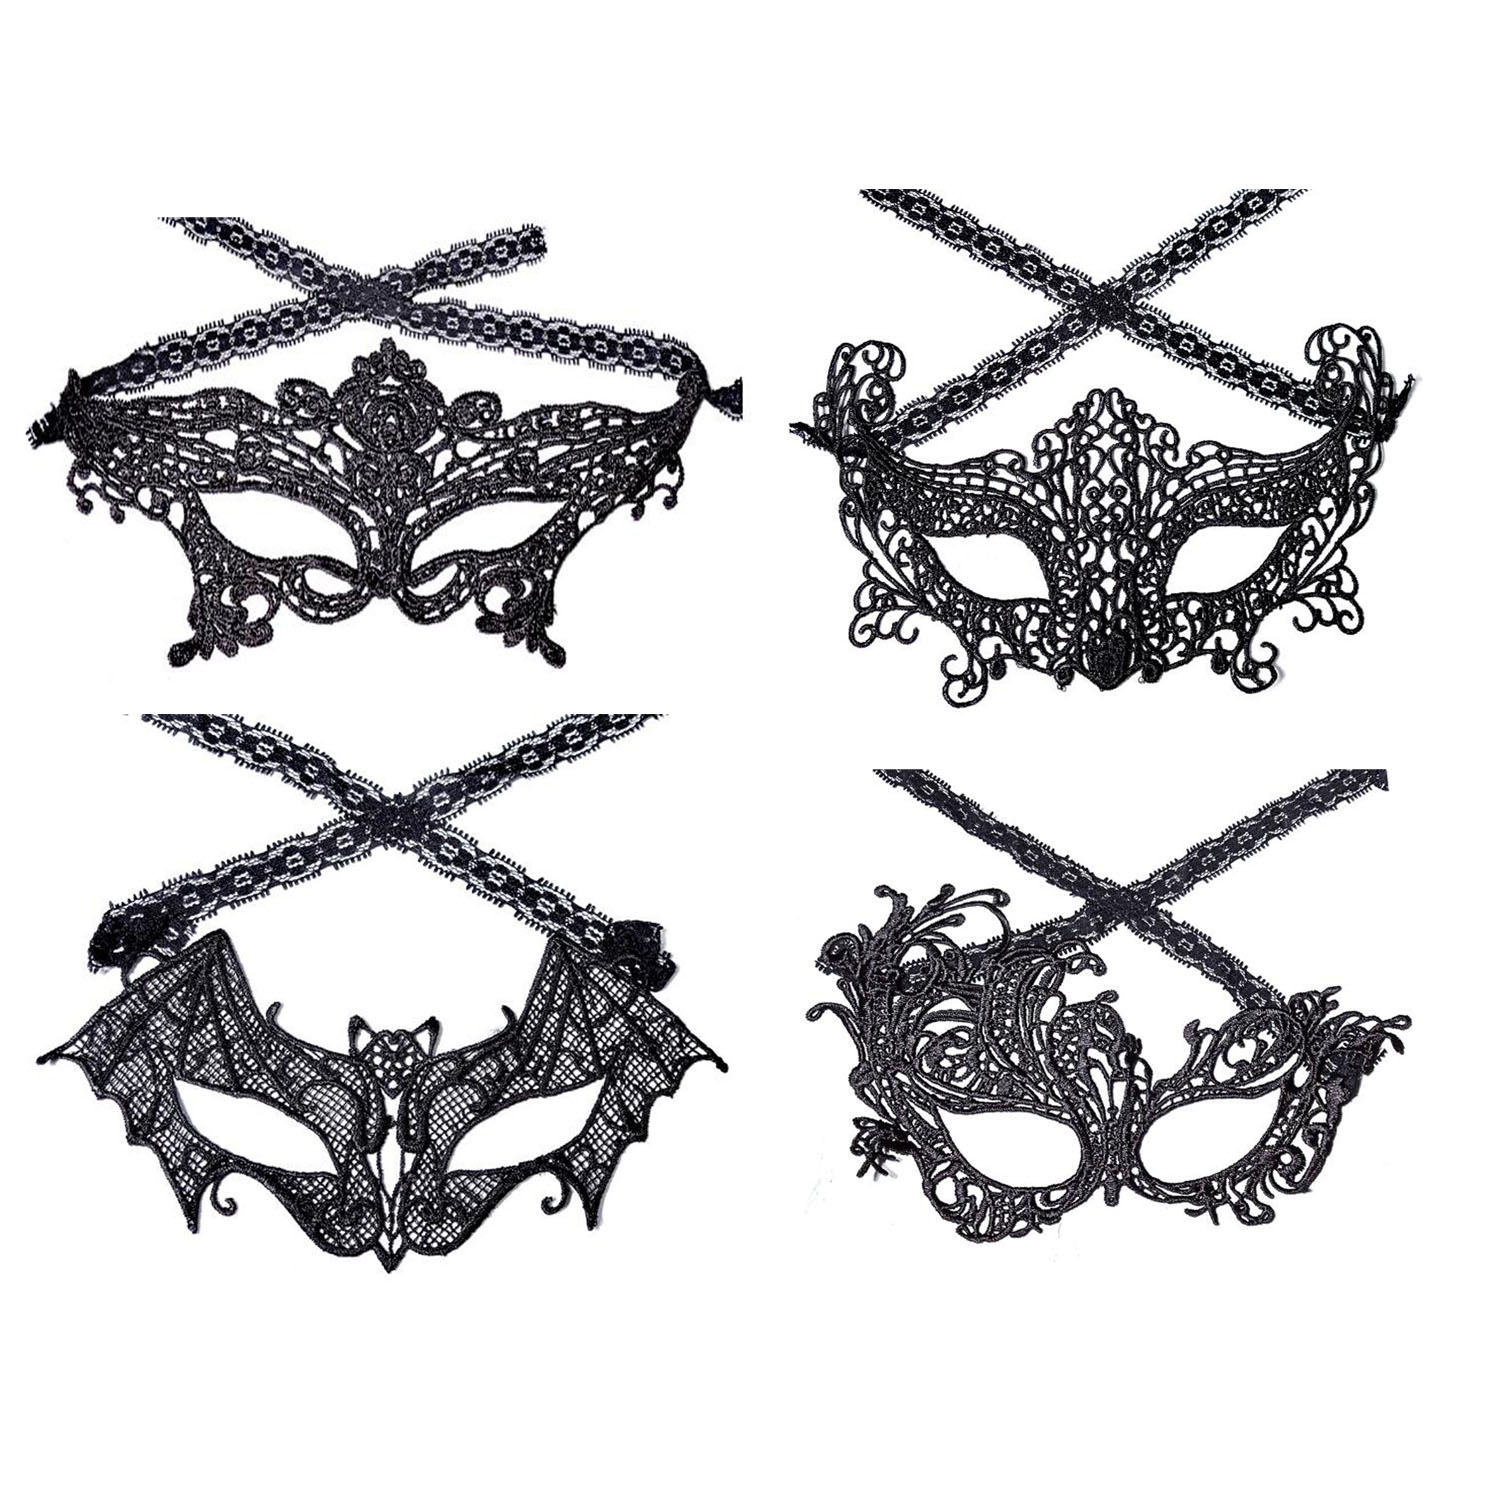 GL-AAA1187 Black Lace Woman Mask for Halloween